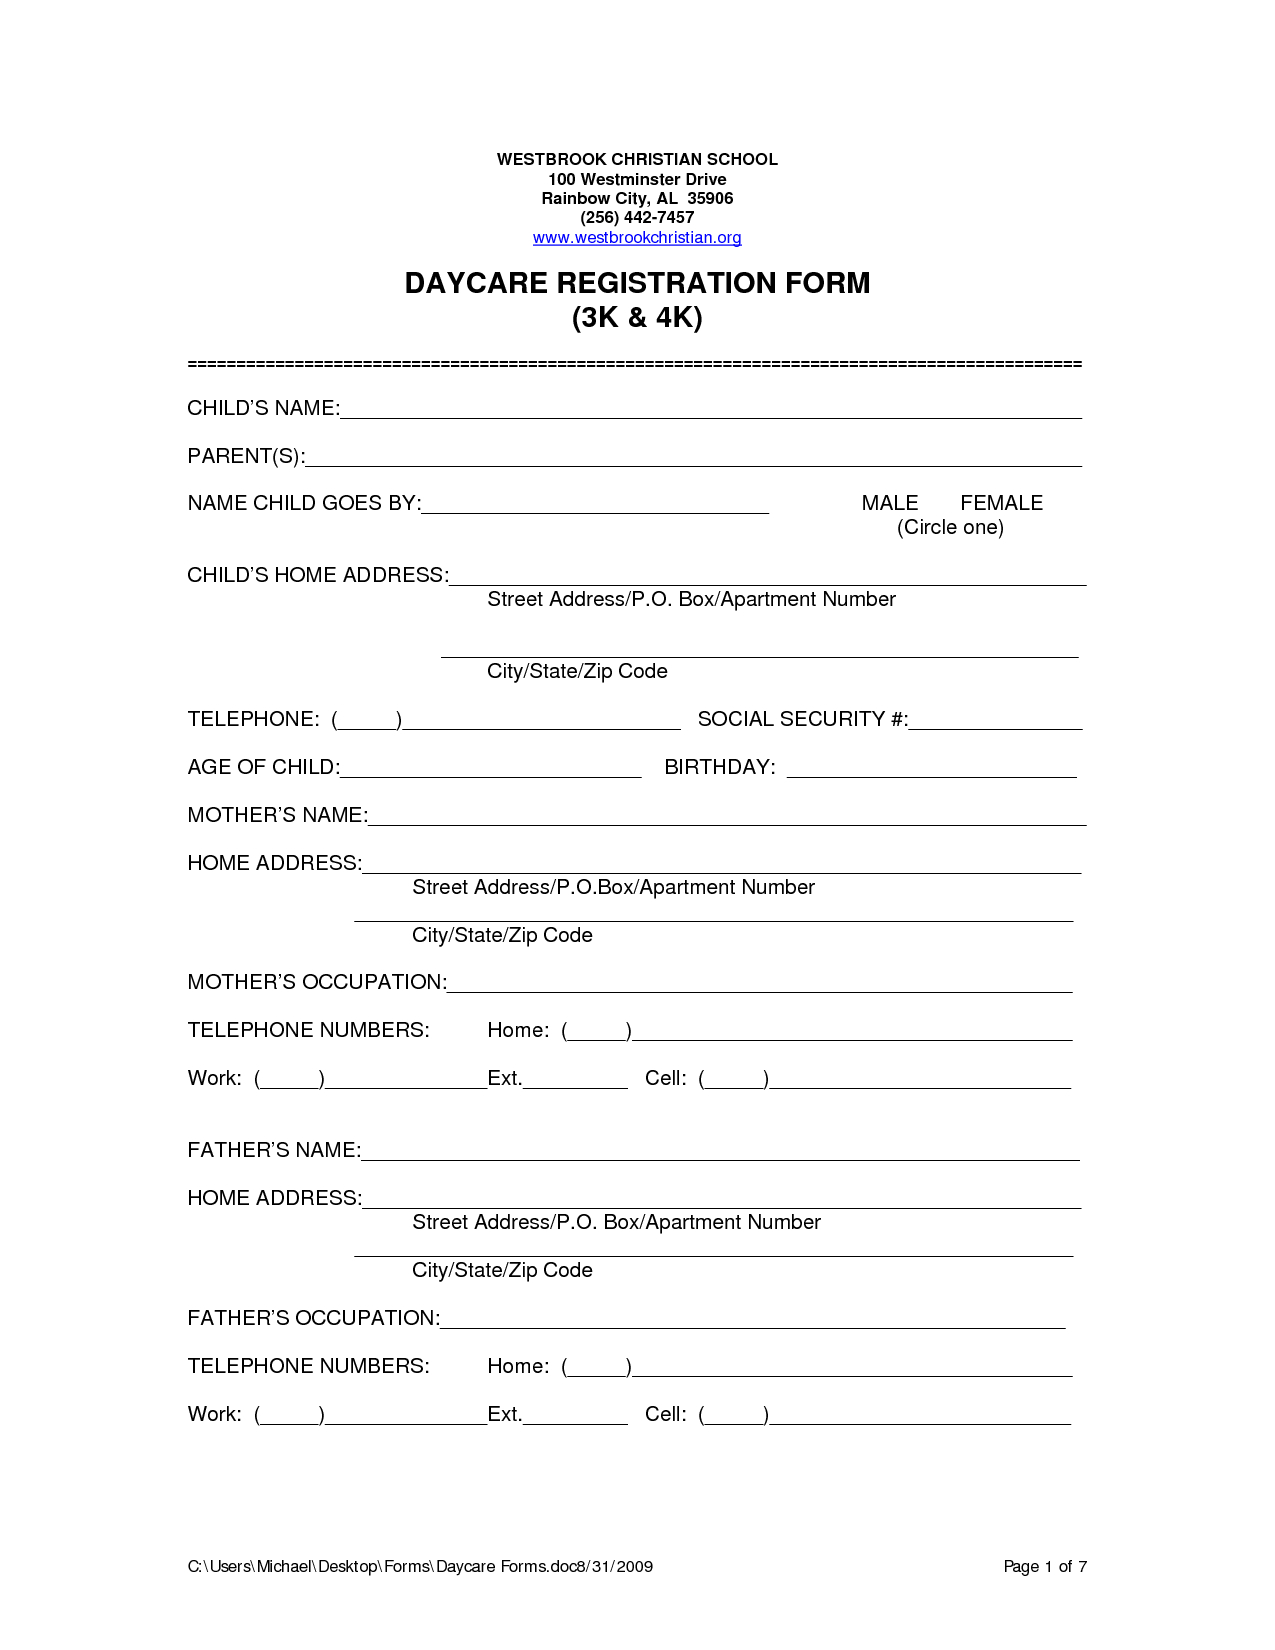 Free Printable Home Daycare Forms | Daycare | Daycare Forms, Home - Free Printable Daycare Forms